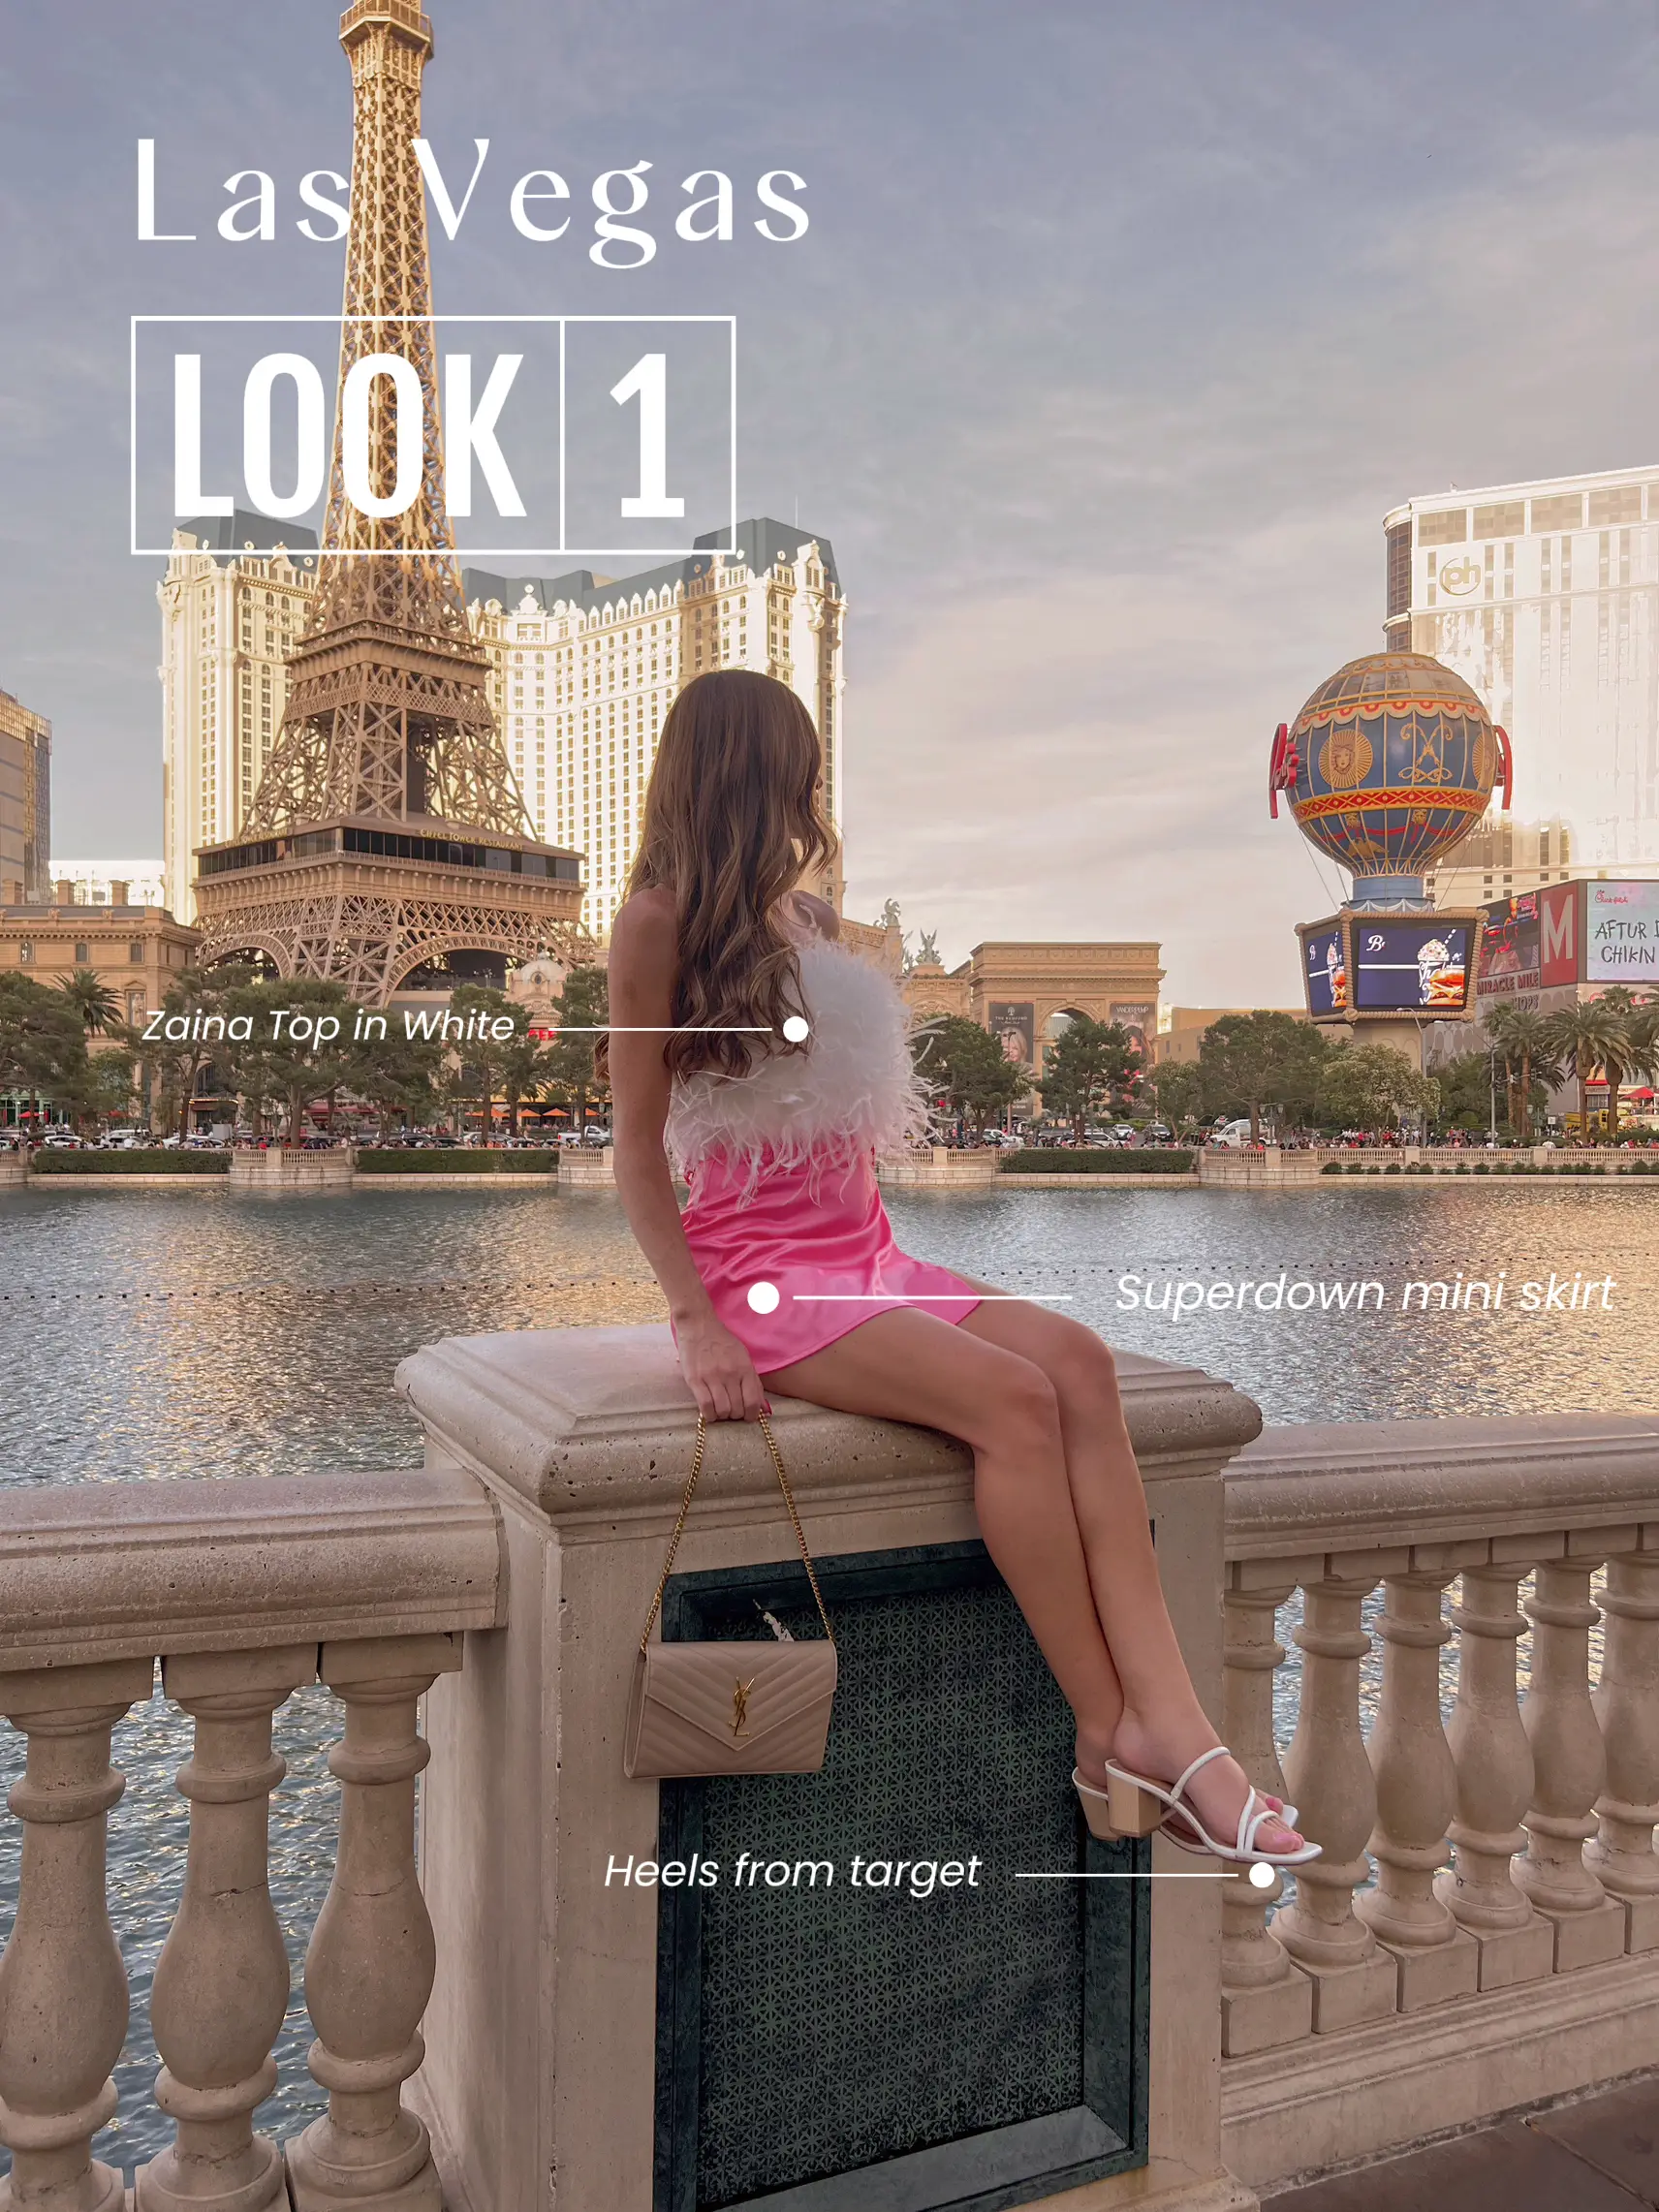 Las Vegas, Gallery posted by Lynden Partch